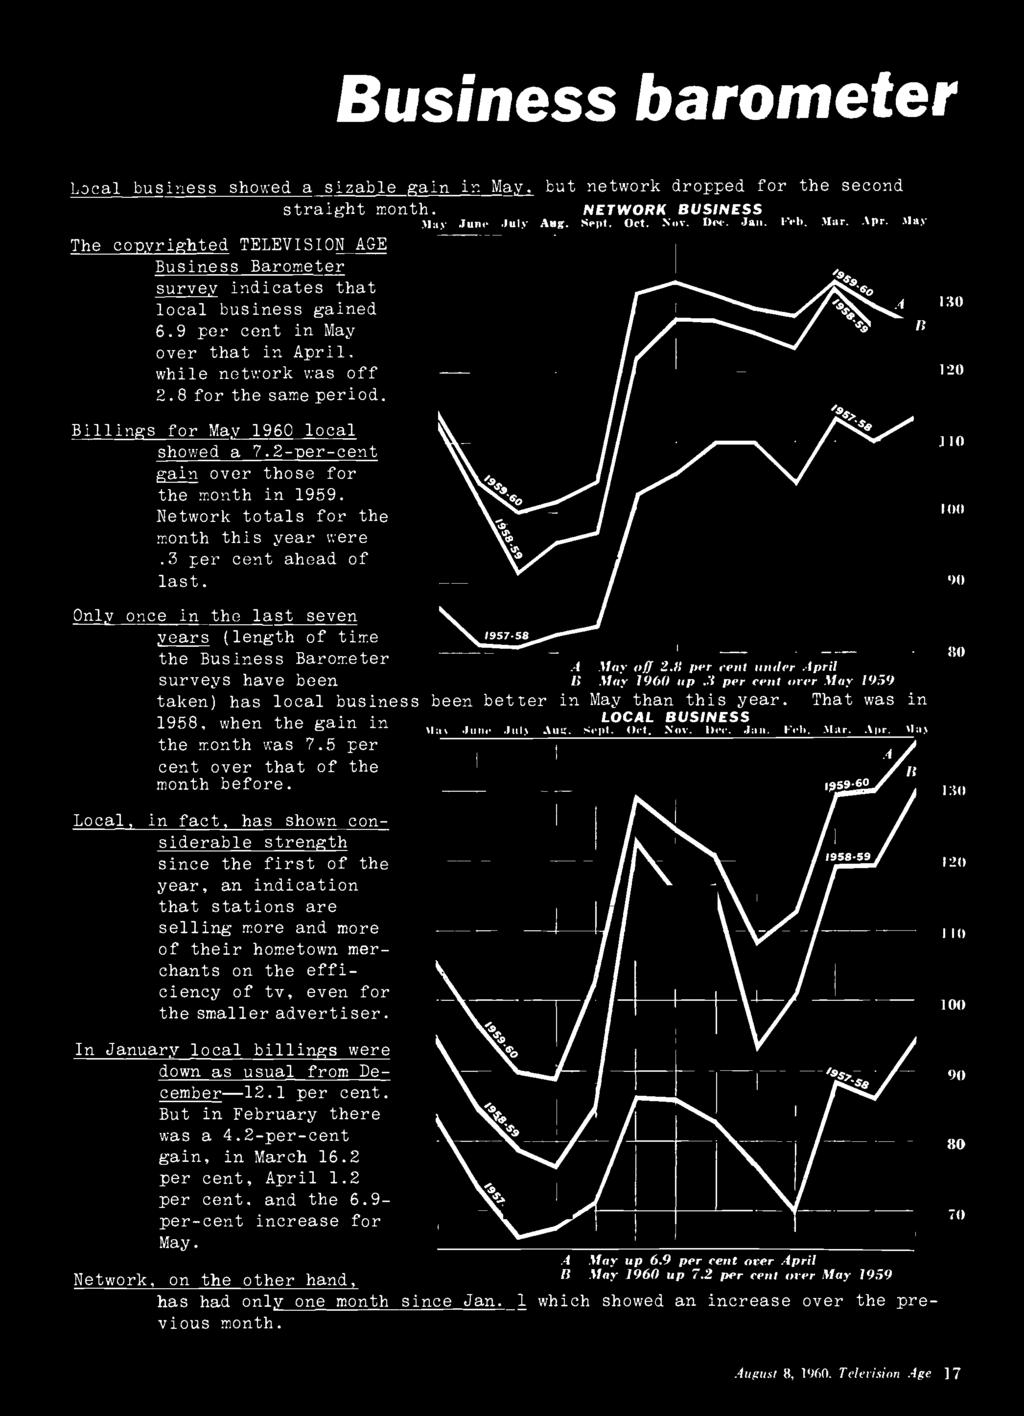 Billings for May 1960 local showed a 7.2- per -cent gain over those for the month in 1959. Network totals for the month this year were.3 per cent ahead of last.